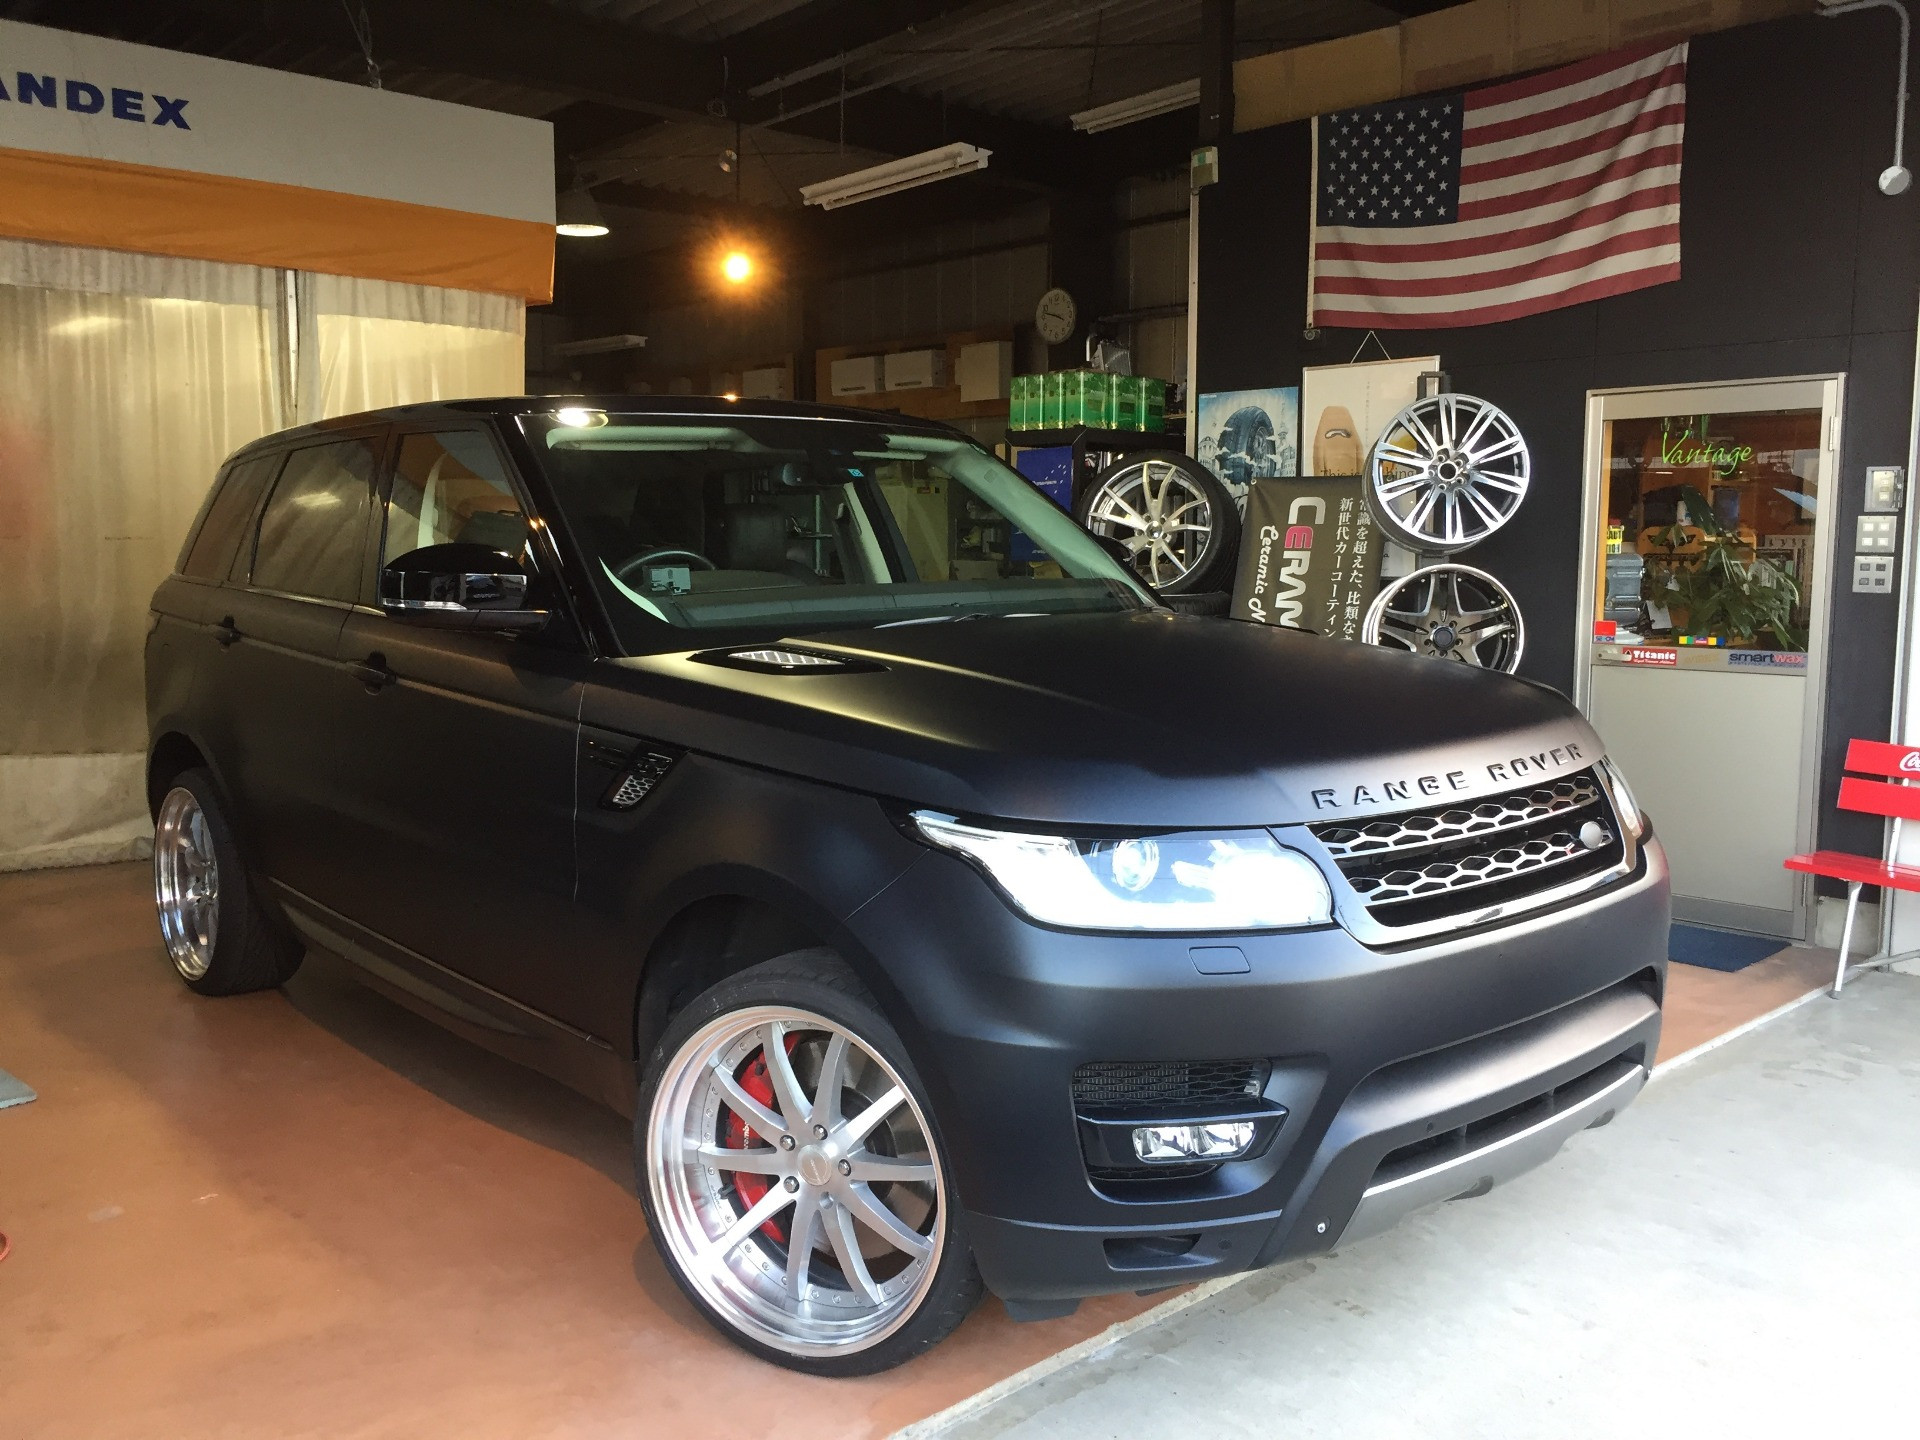 RANGE ROVER SPORTS　ALL PAINT